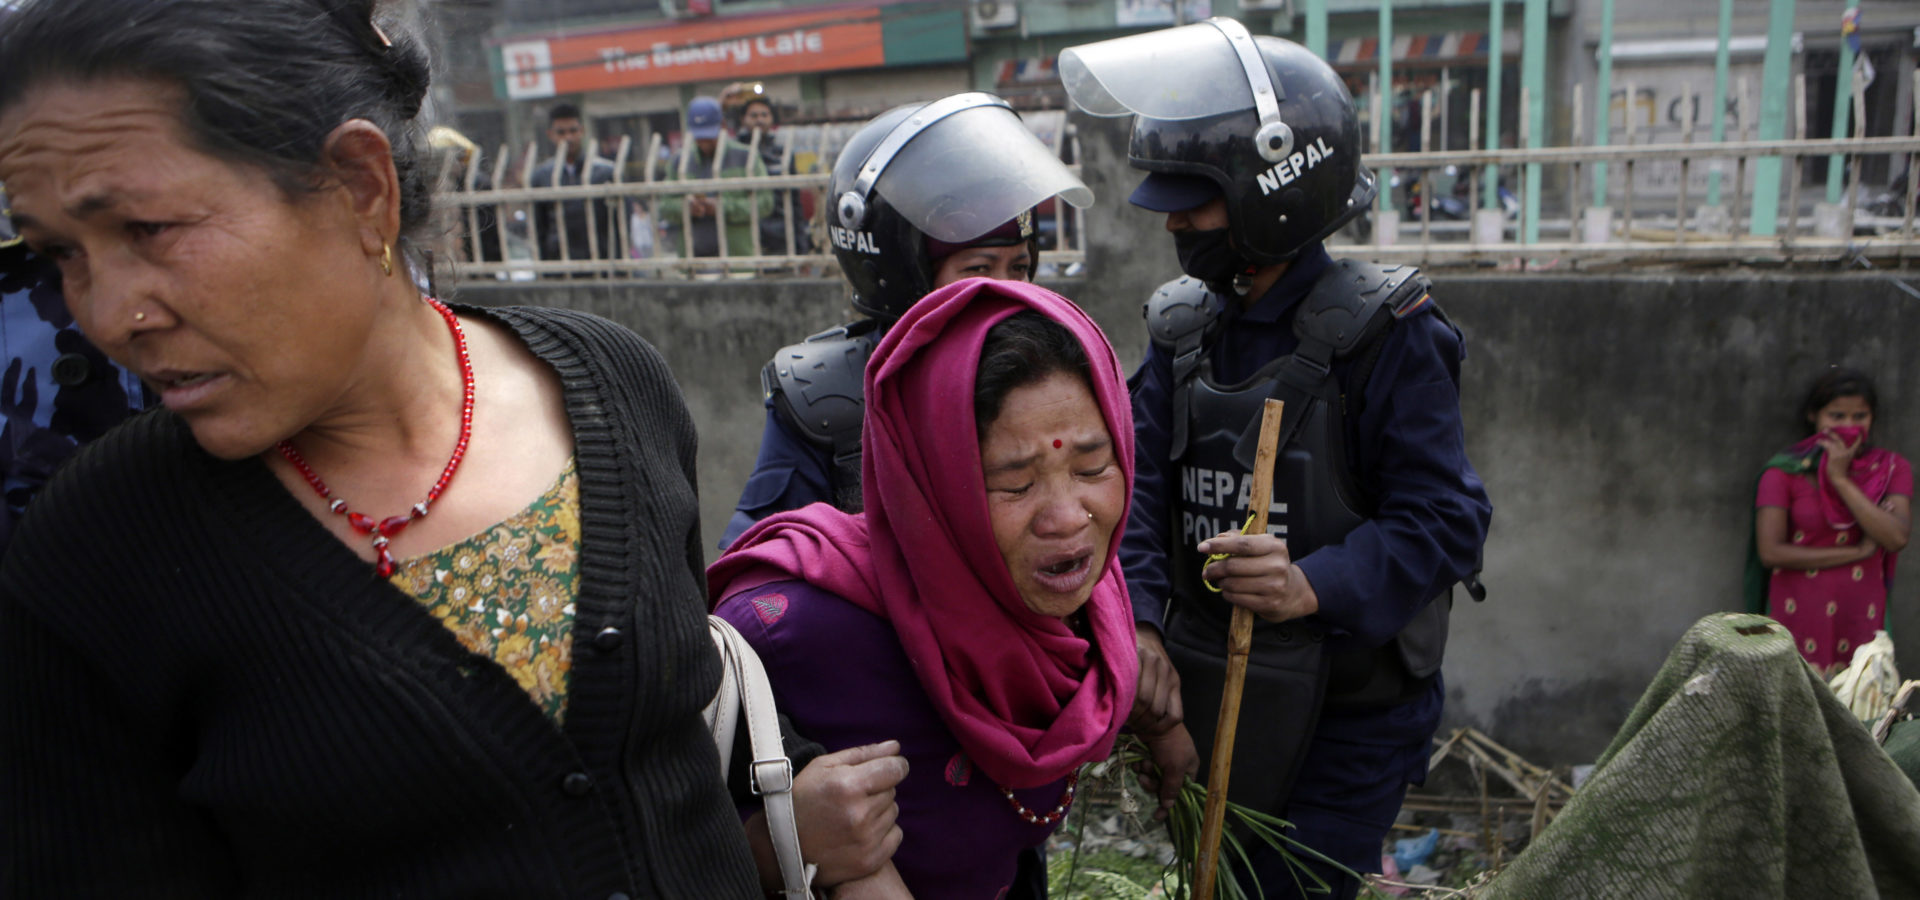 A woman cries as her temporary home was torn down by police in a quake victims' shelter in downtown Kathmandu, Nepal, Tuesday, March 14, 2017. Police tore down hundreds of temporary homes in the Nepalese capital where people who lost their homes in the 2015 earthquake have been living for two years. (AP/Niranjan Shrestha)